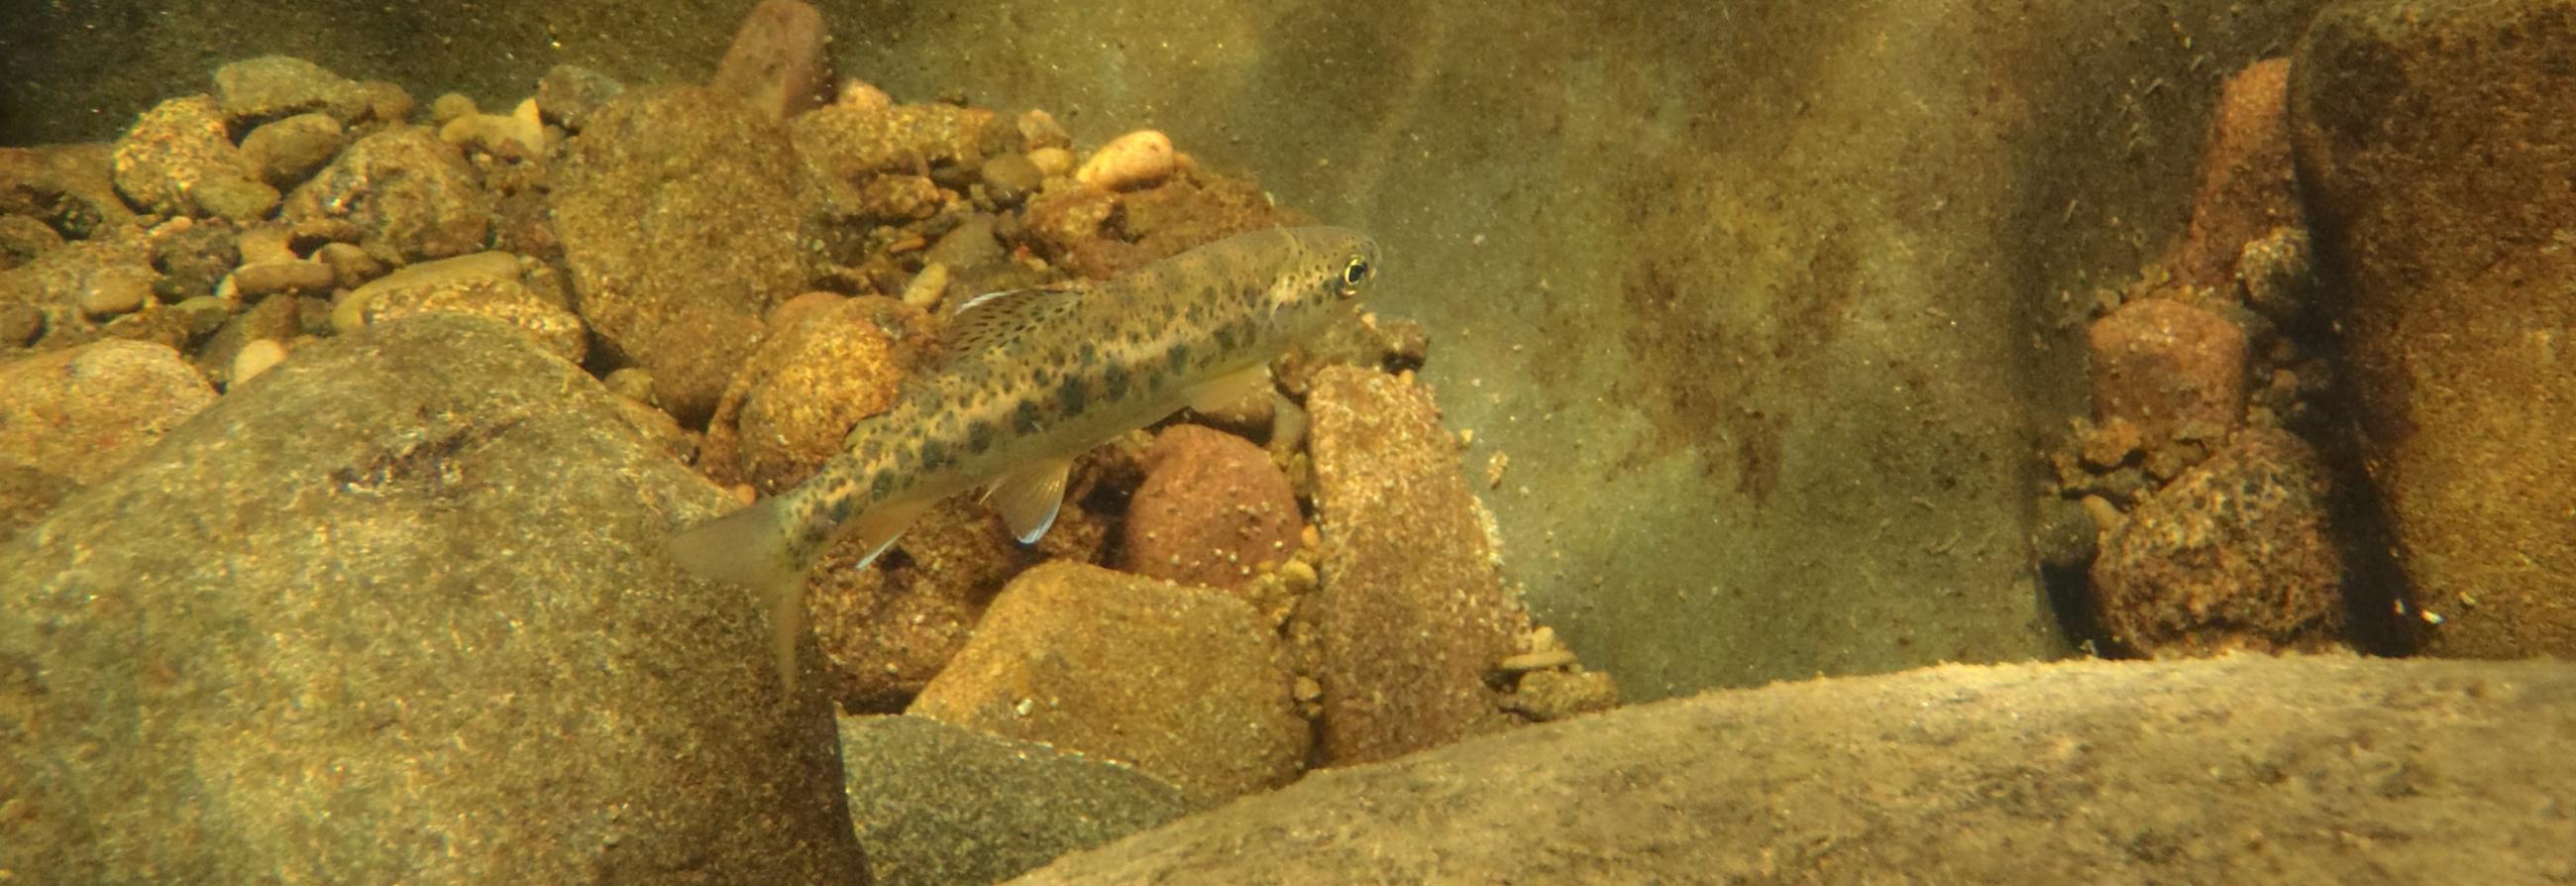 Image of a small steelhead trout fry with cobble stones ang gravel in the background